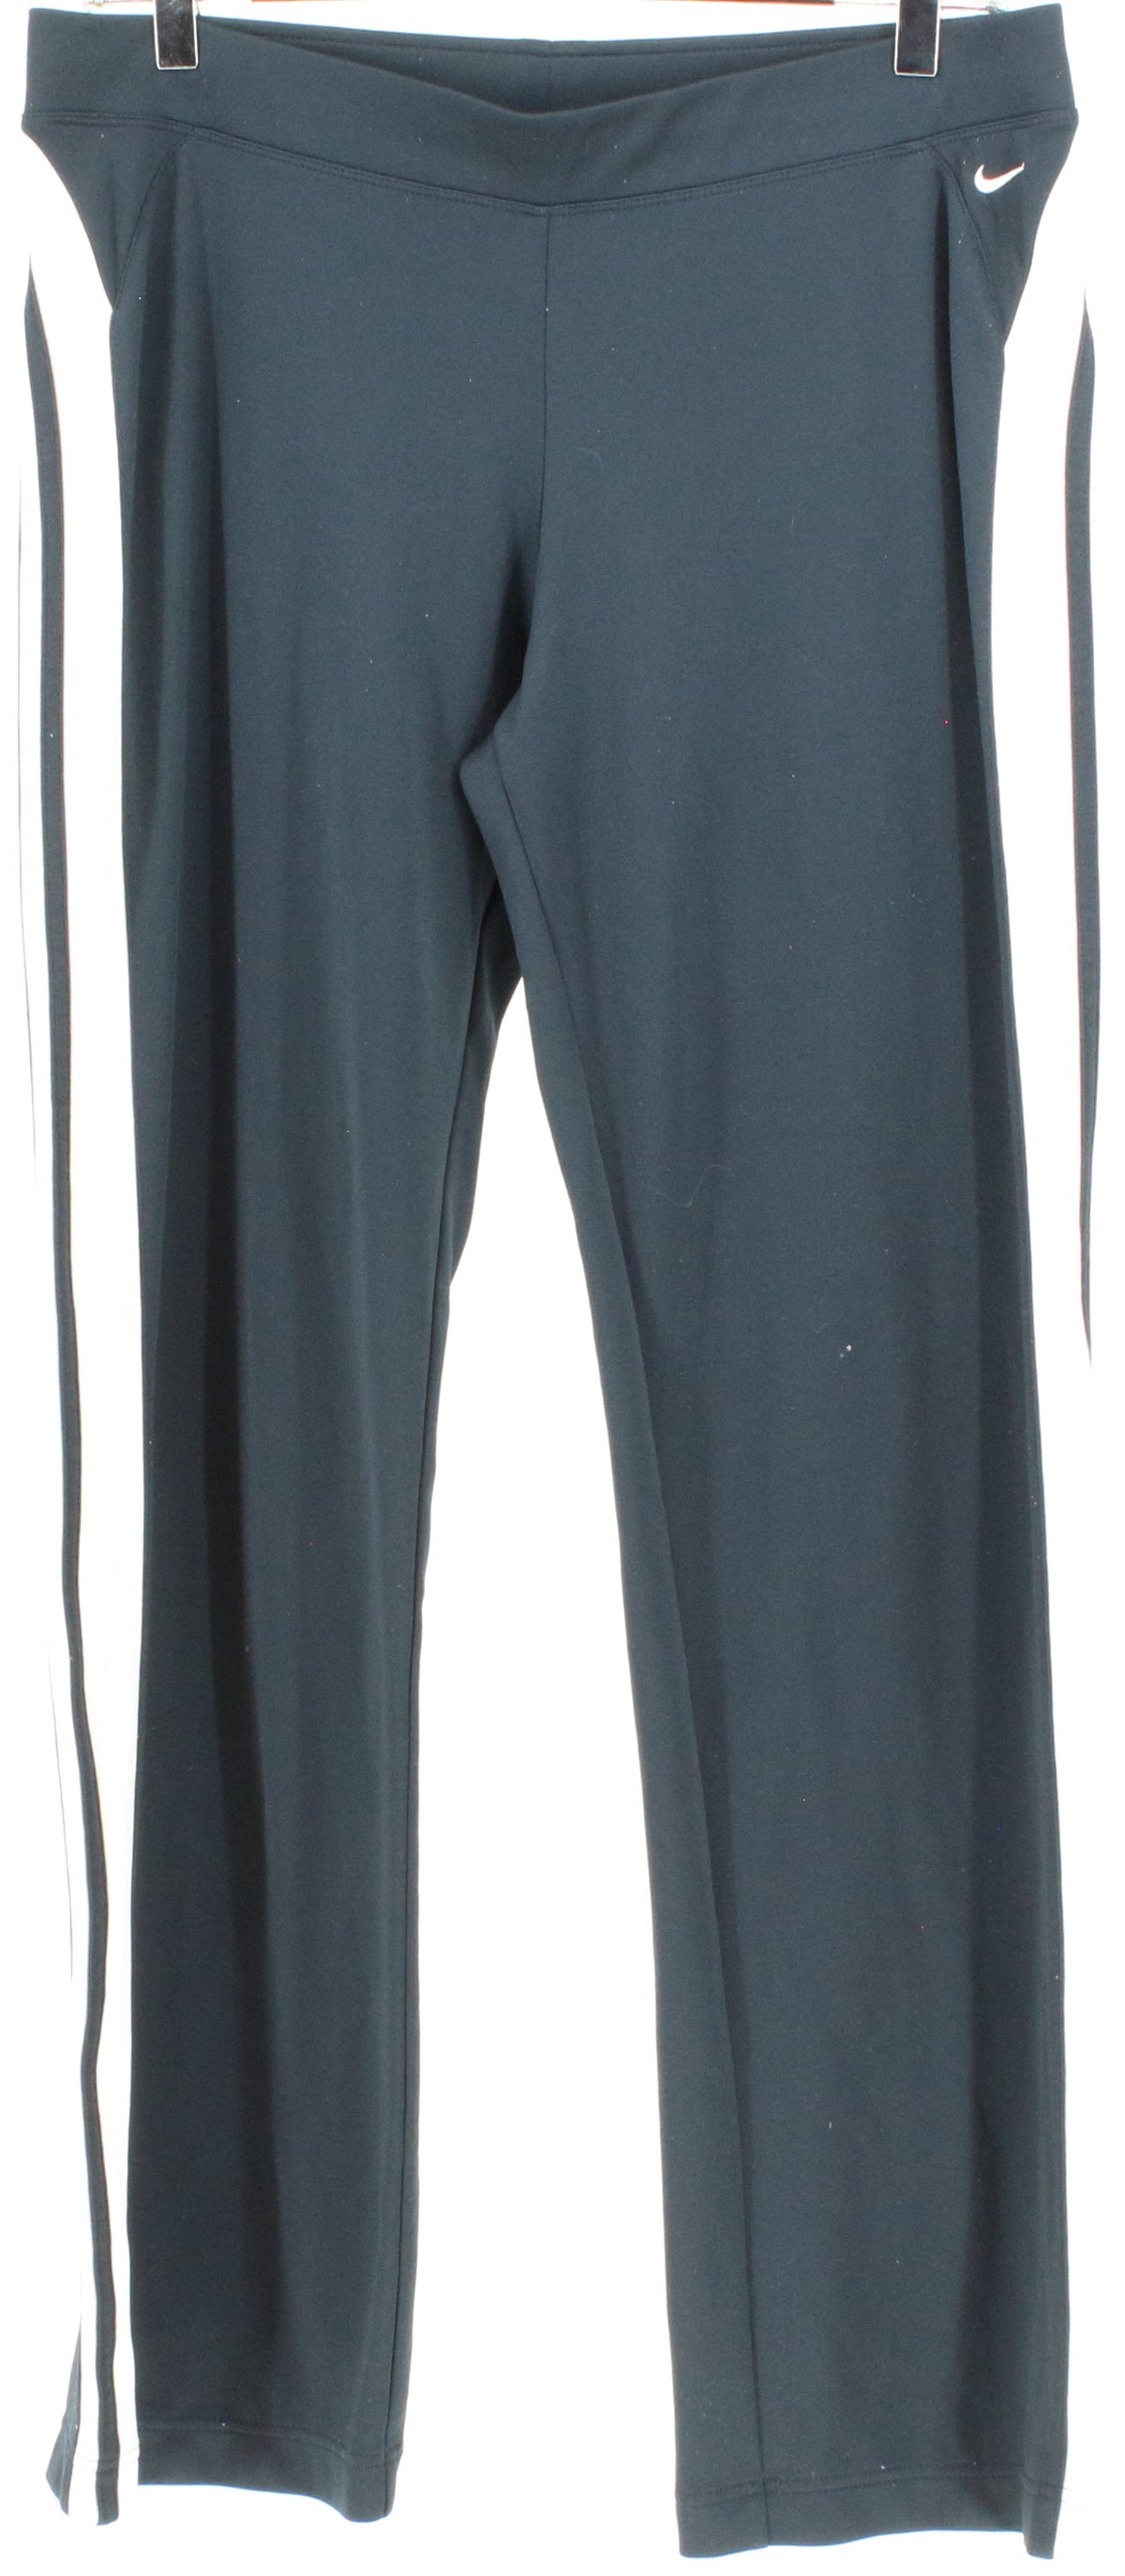 Nike Navy Blue and White Women's Active Straight Pants